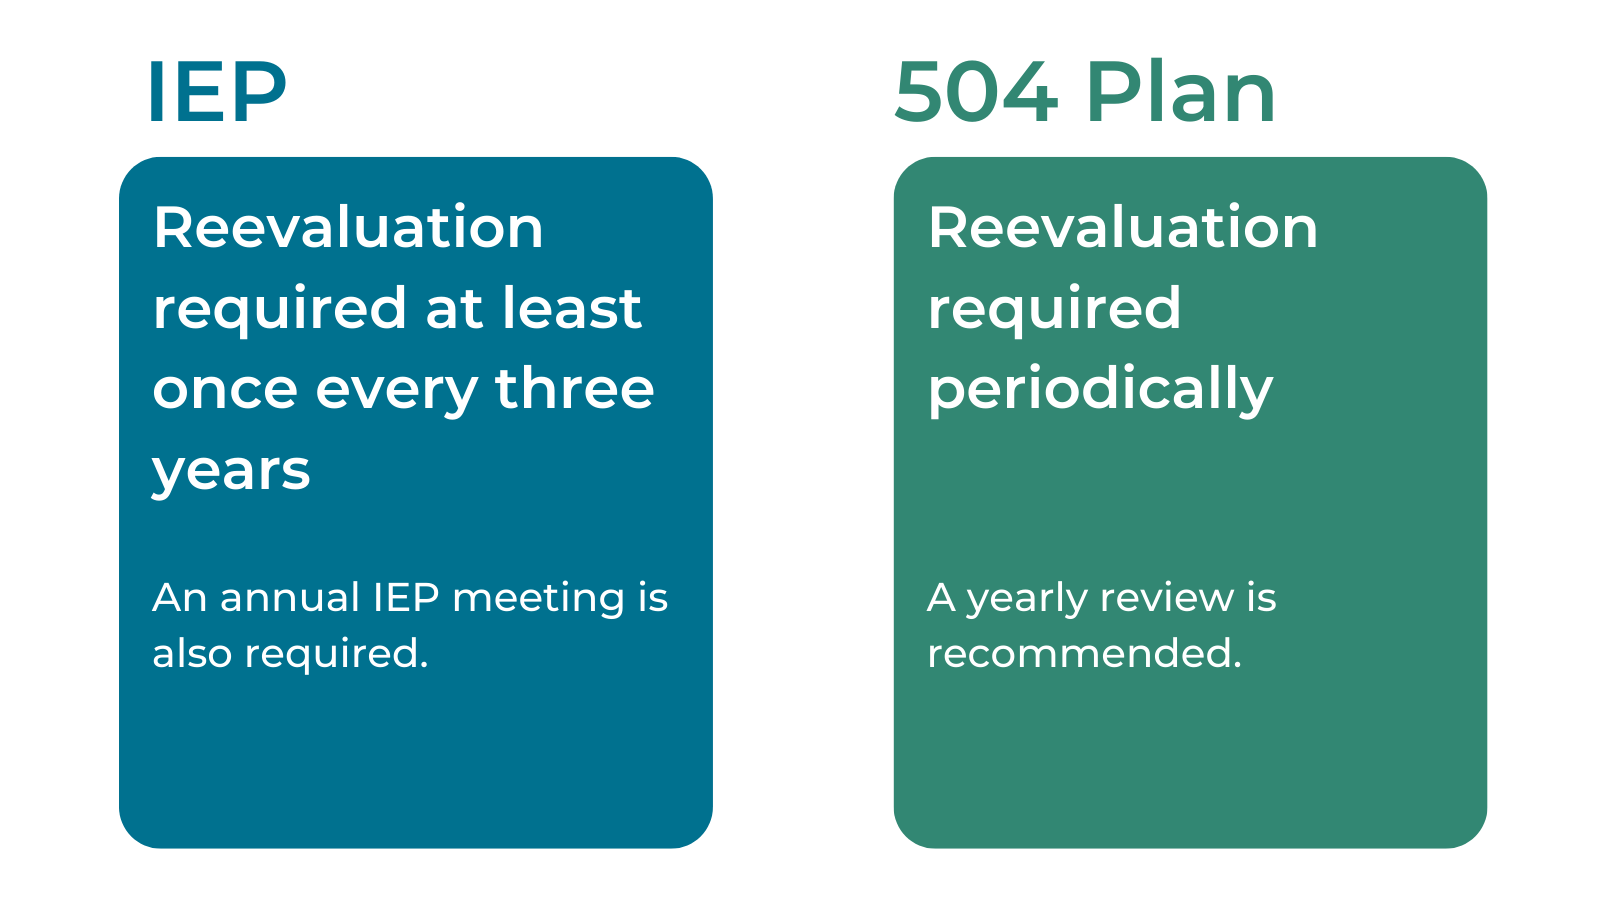 IEP: Reevaluation required at least once every three years. An annual IEP meeting is also required. 

504 Plan: Reevaluation required periodically. A yearly review is recommended